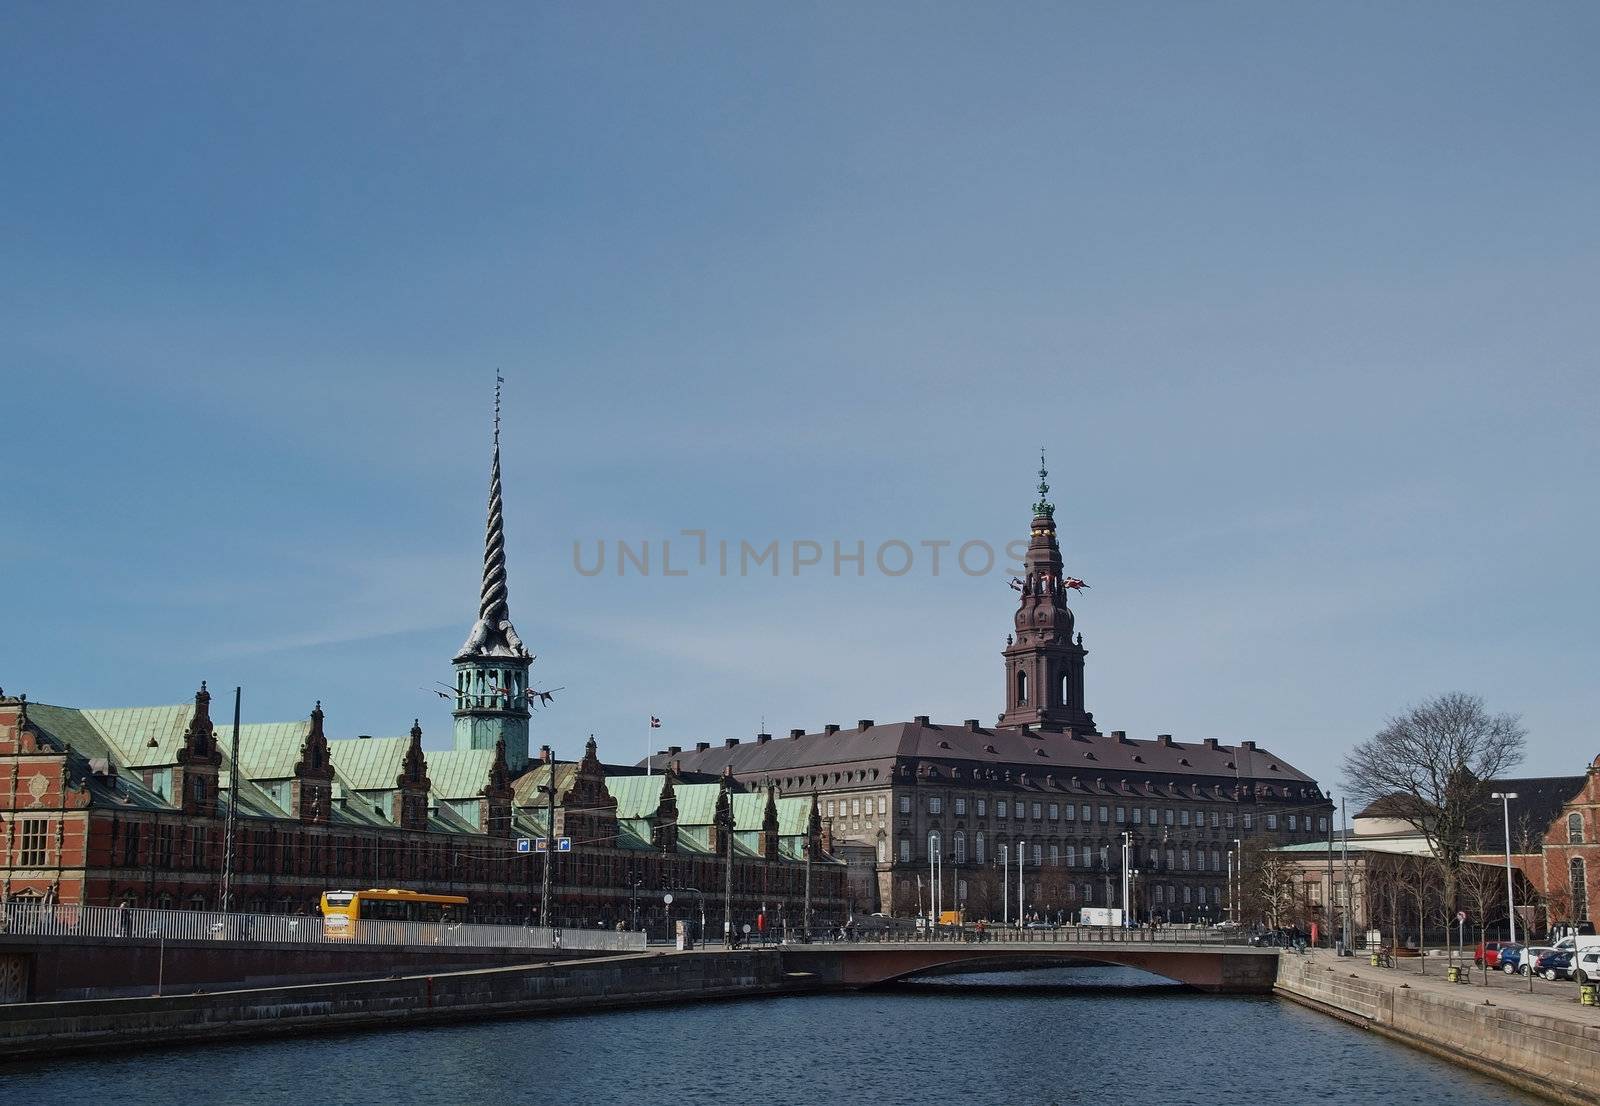 danish parliament building (Christiansborg Palace) at the center and the old danish stock exchange building on left